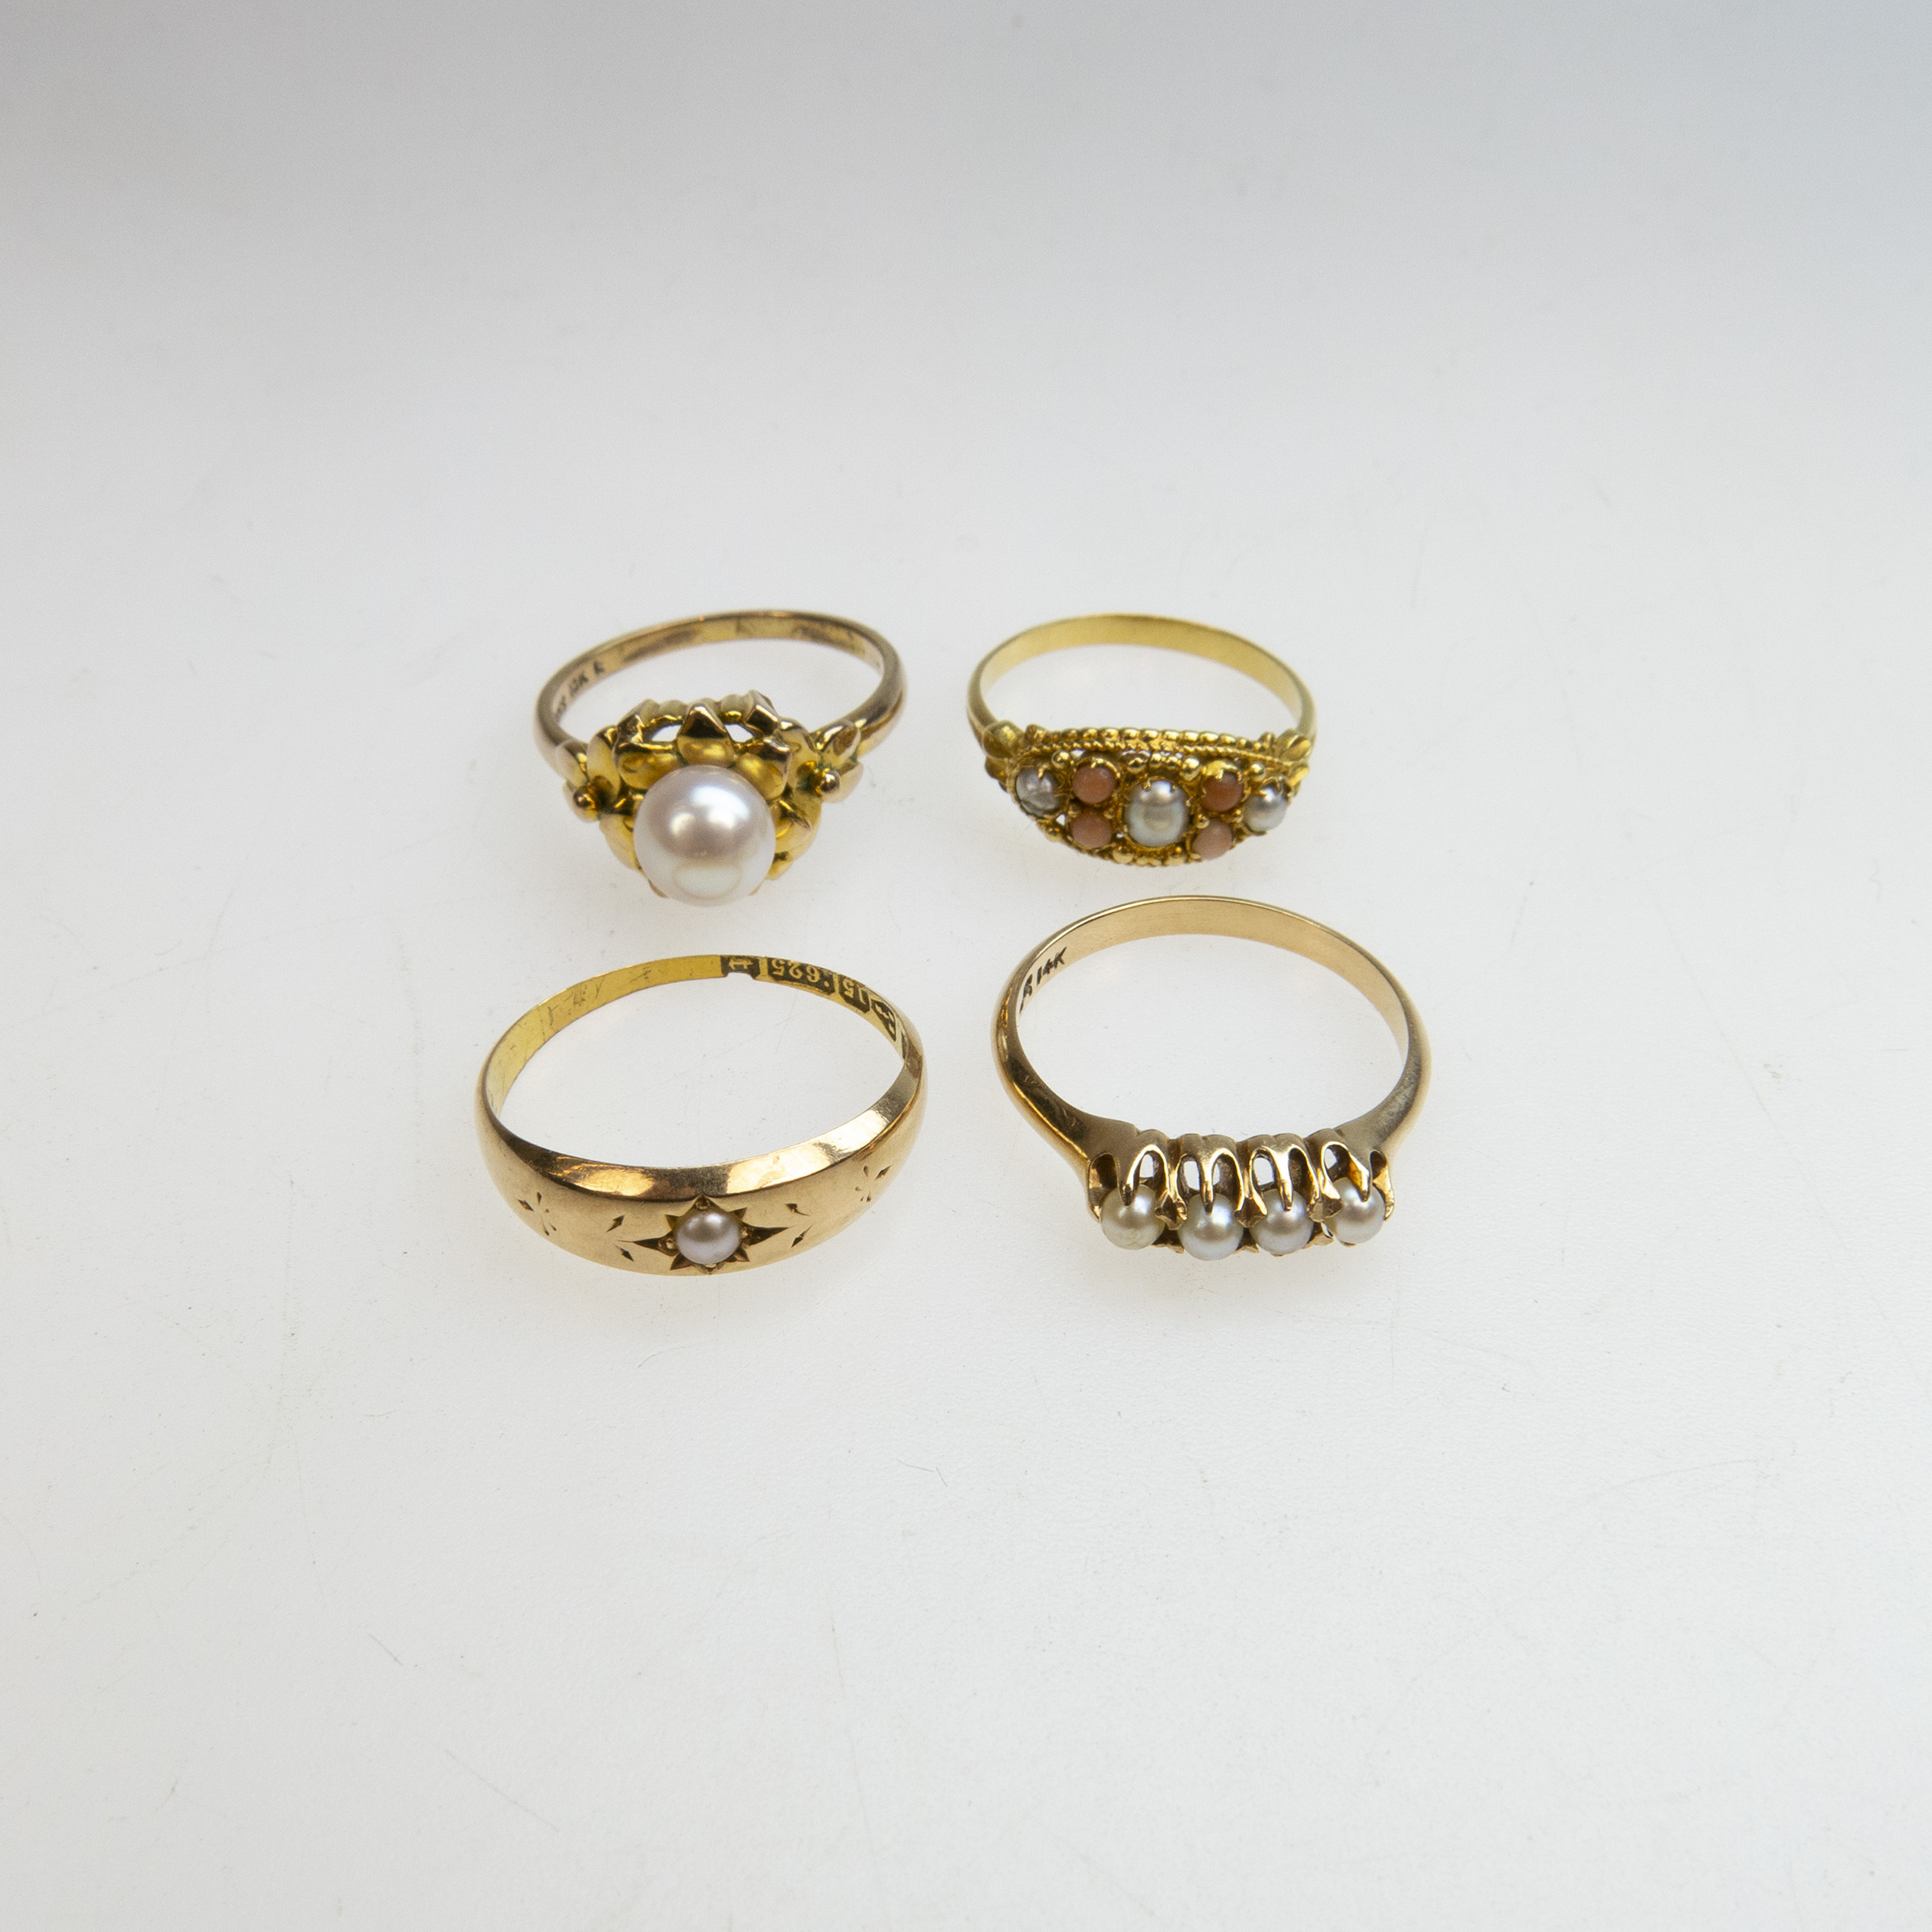 1 x 10k, 1 x 14k, 1 x 15k and 1 x 18k Yellow Gold Rings